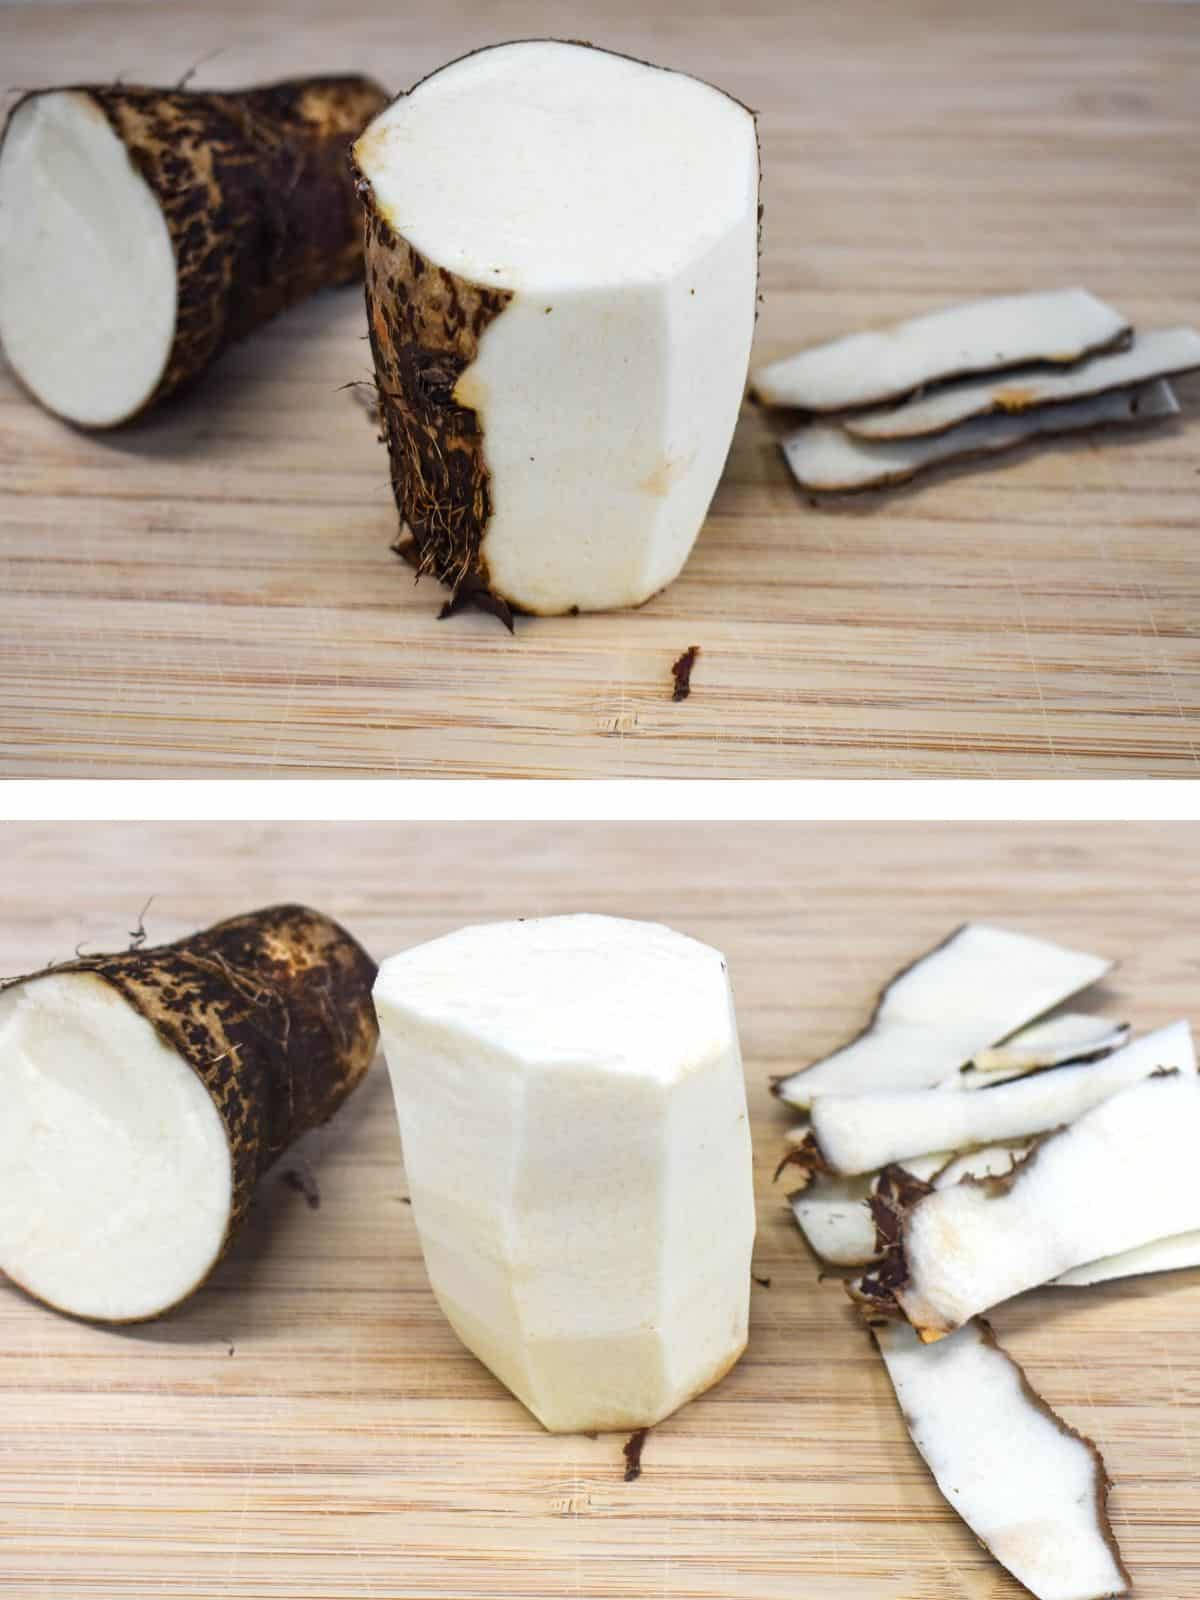 Two images showing a malanga cut in half in the process of peeling on a wood cutting board.